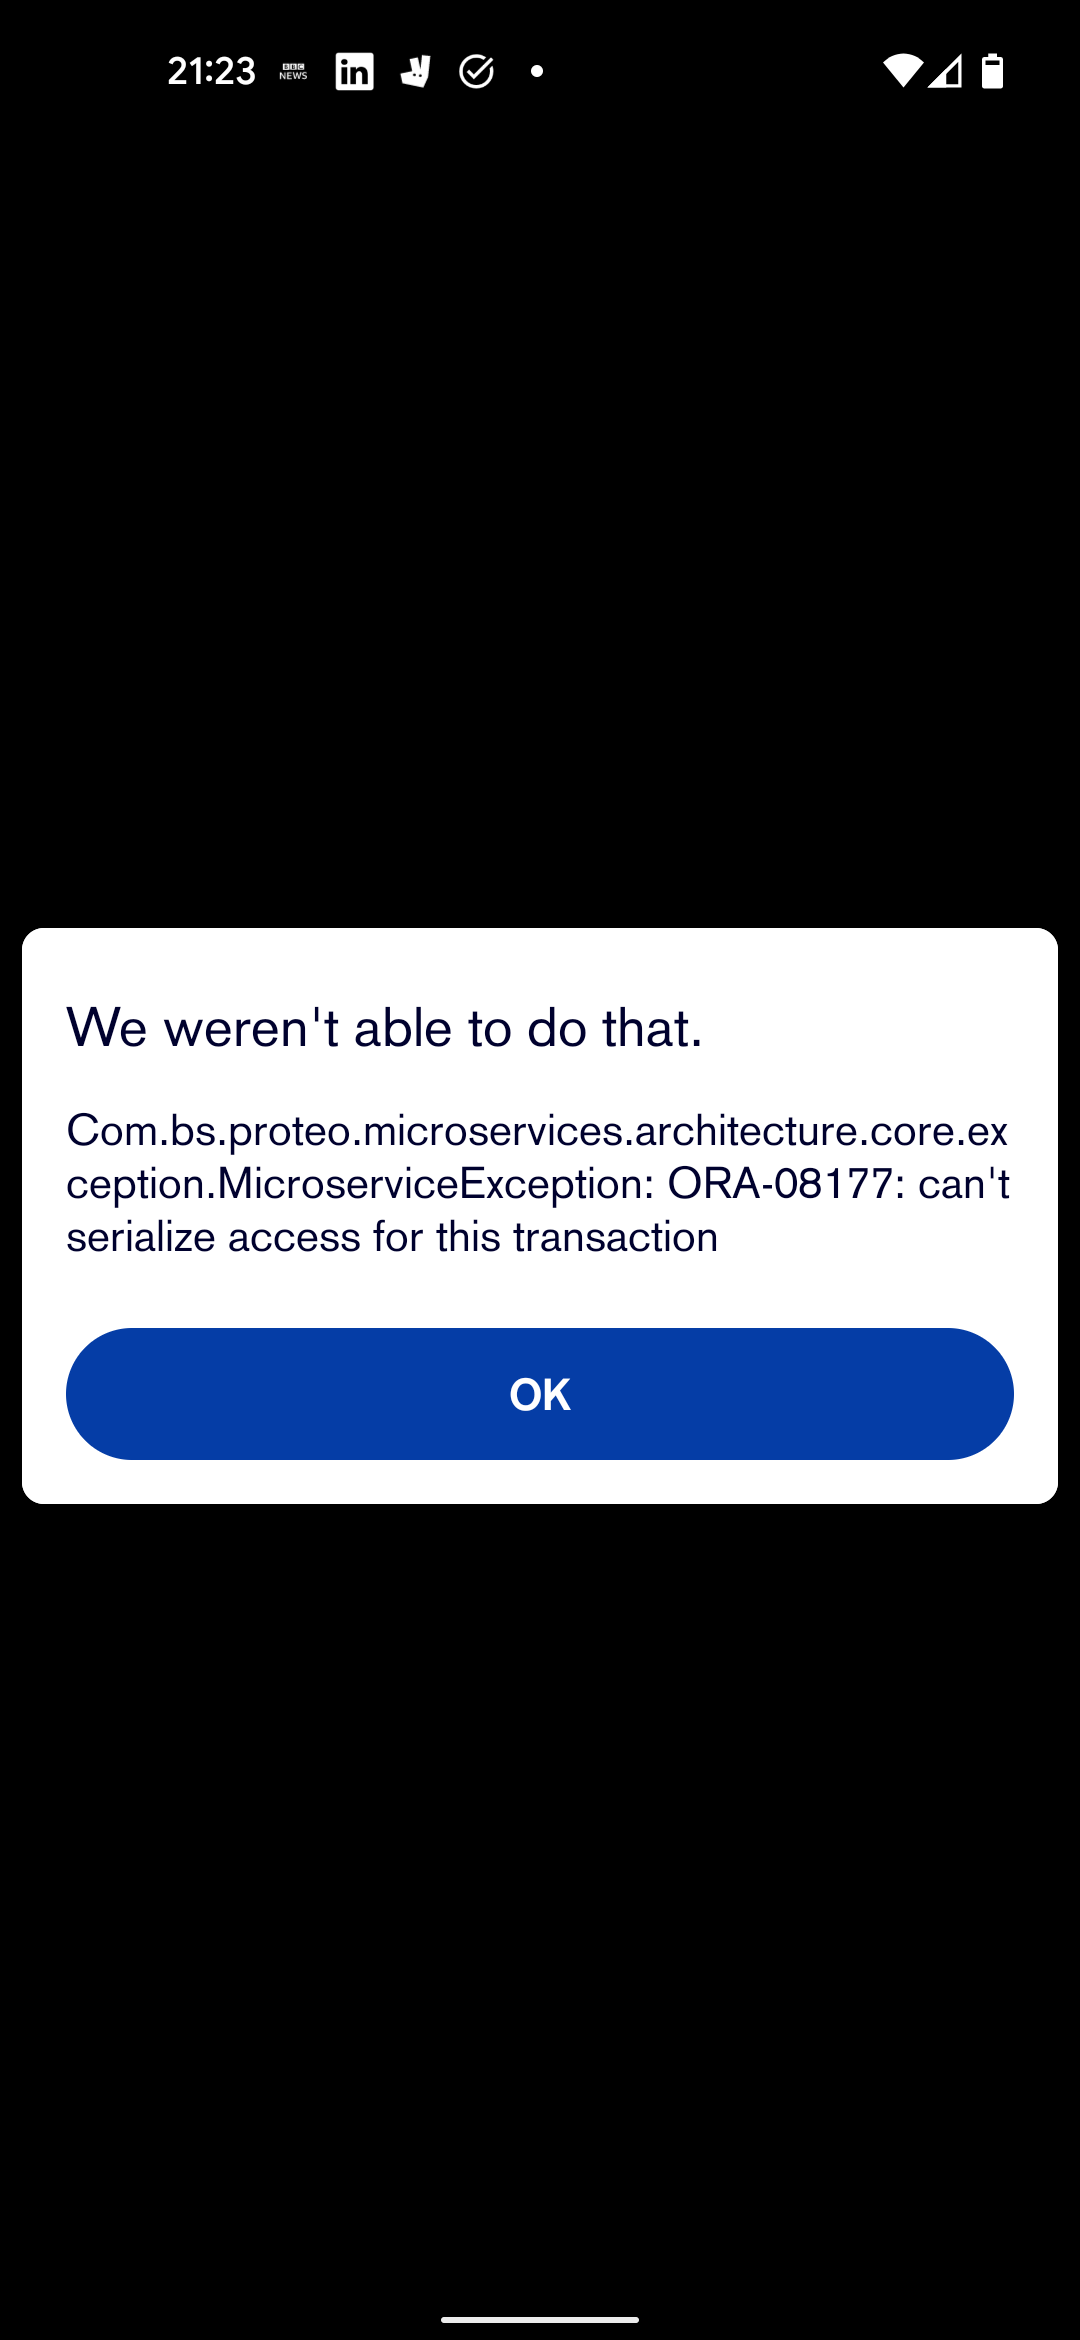 We weren't able to do that. Com.bs.proteo.microservices.architecture.core.exceptions.MicroserviceException: ORA-08177: can’t serialize access for this transaction